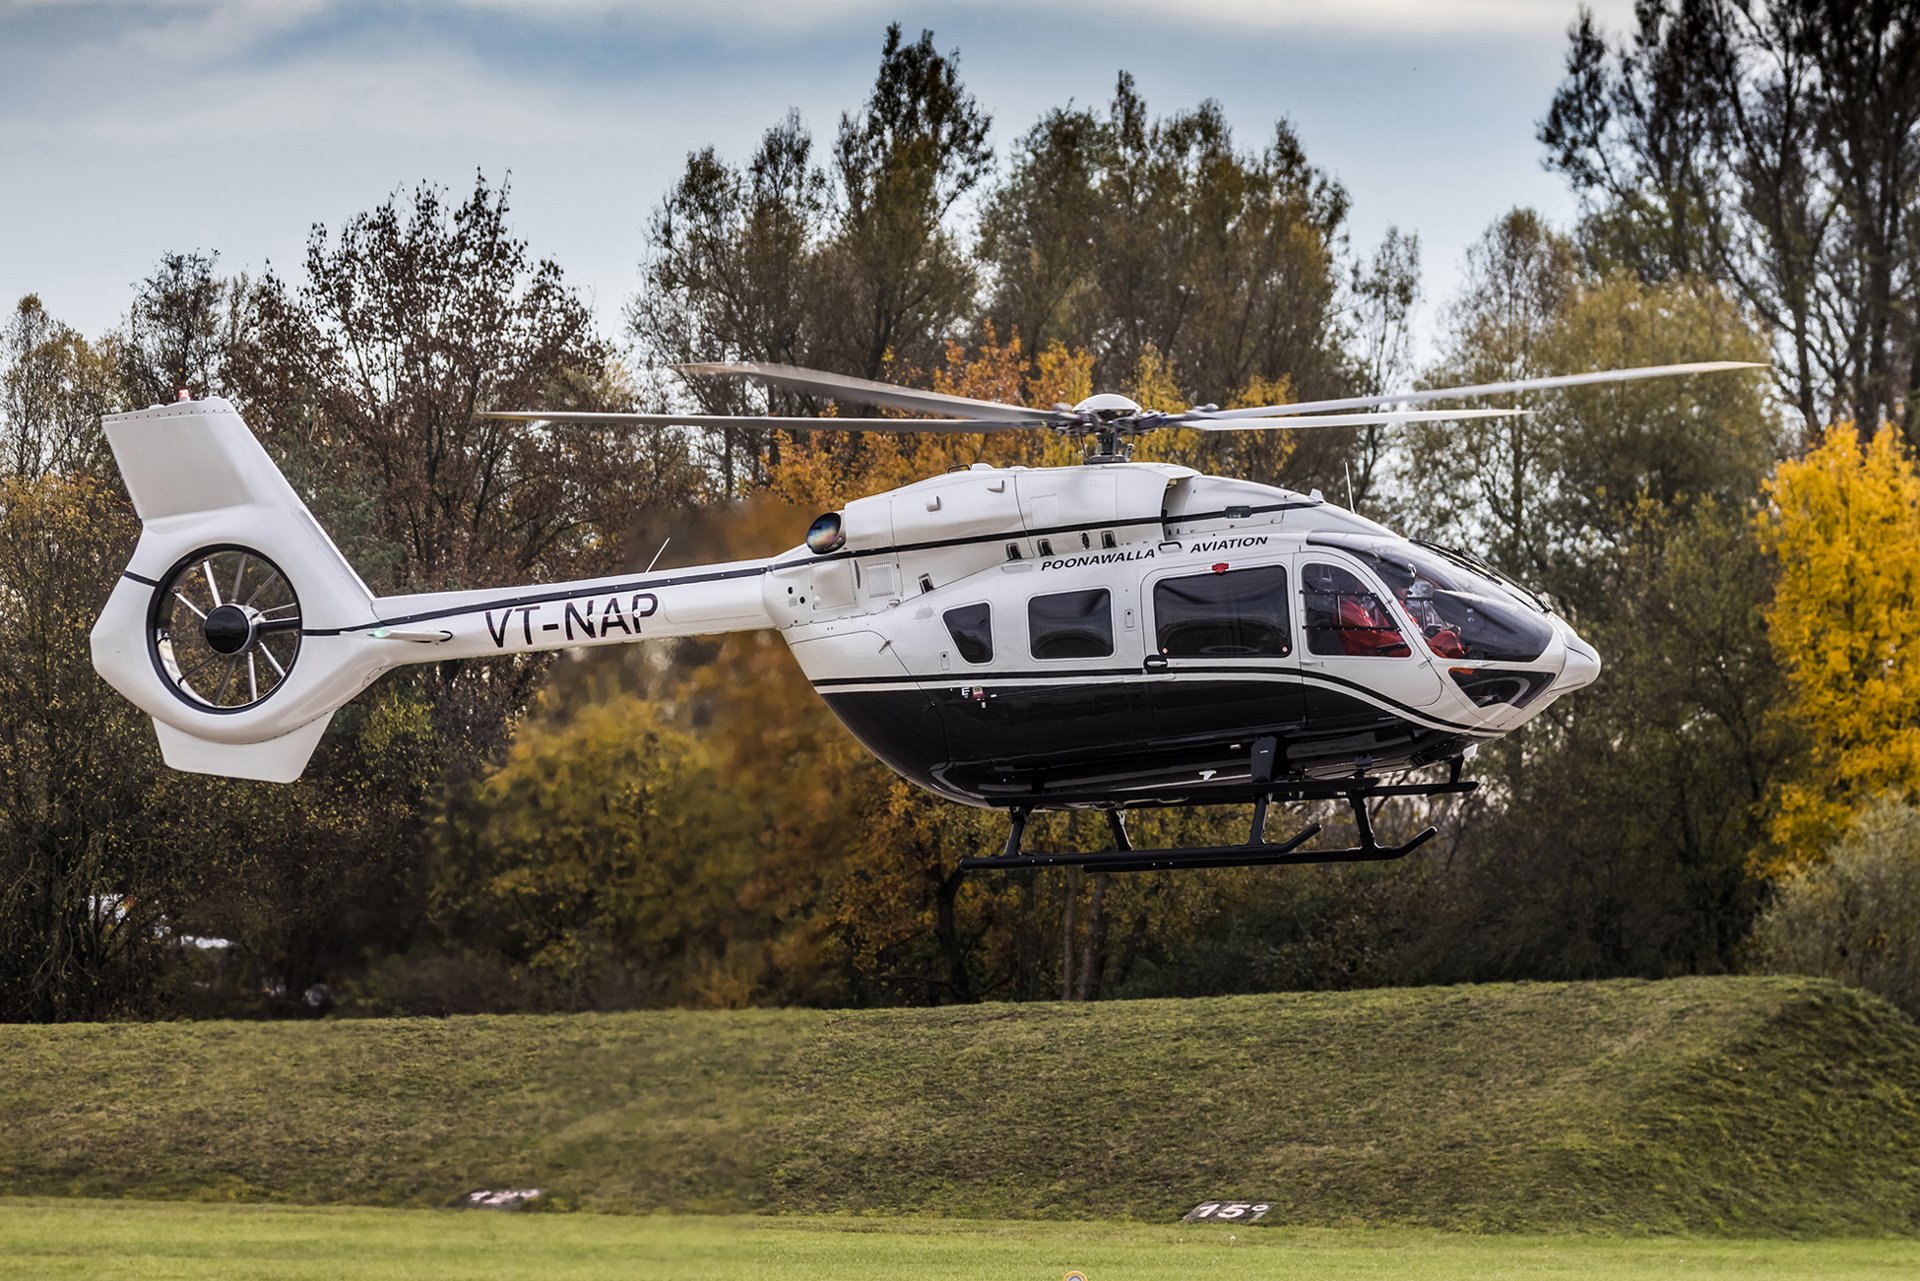 The ACH145 delivery marks the entry of the twin engine helicopter into India’s private and business aviation market. Airbus Photo